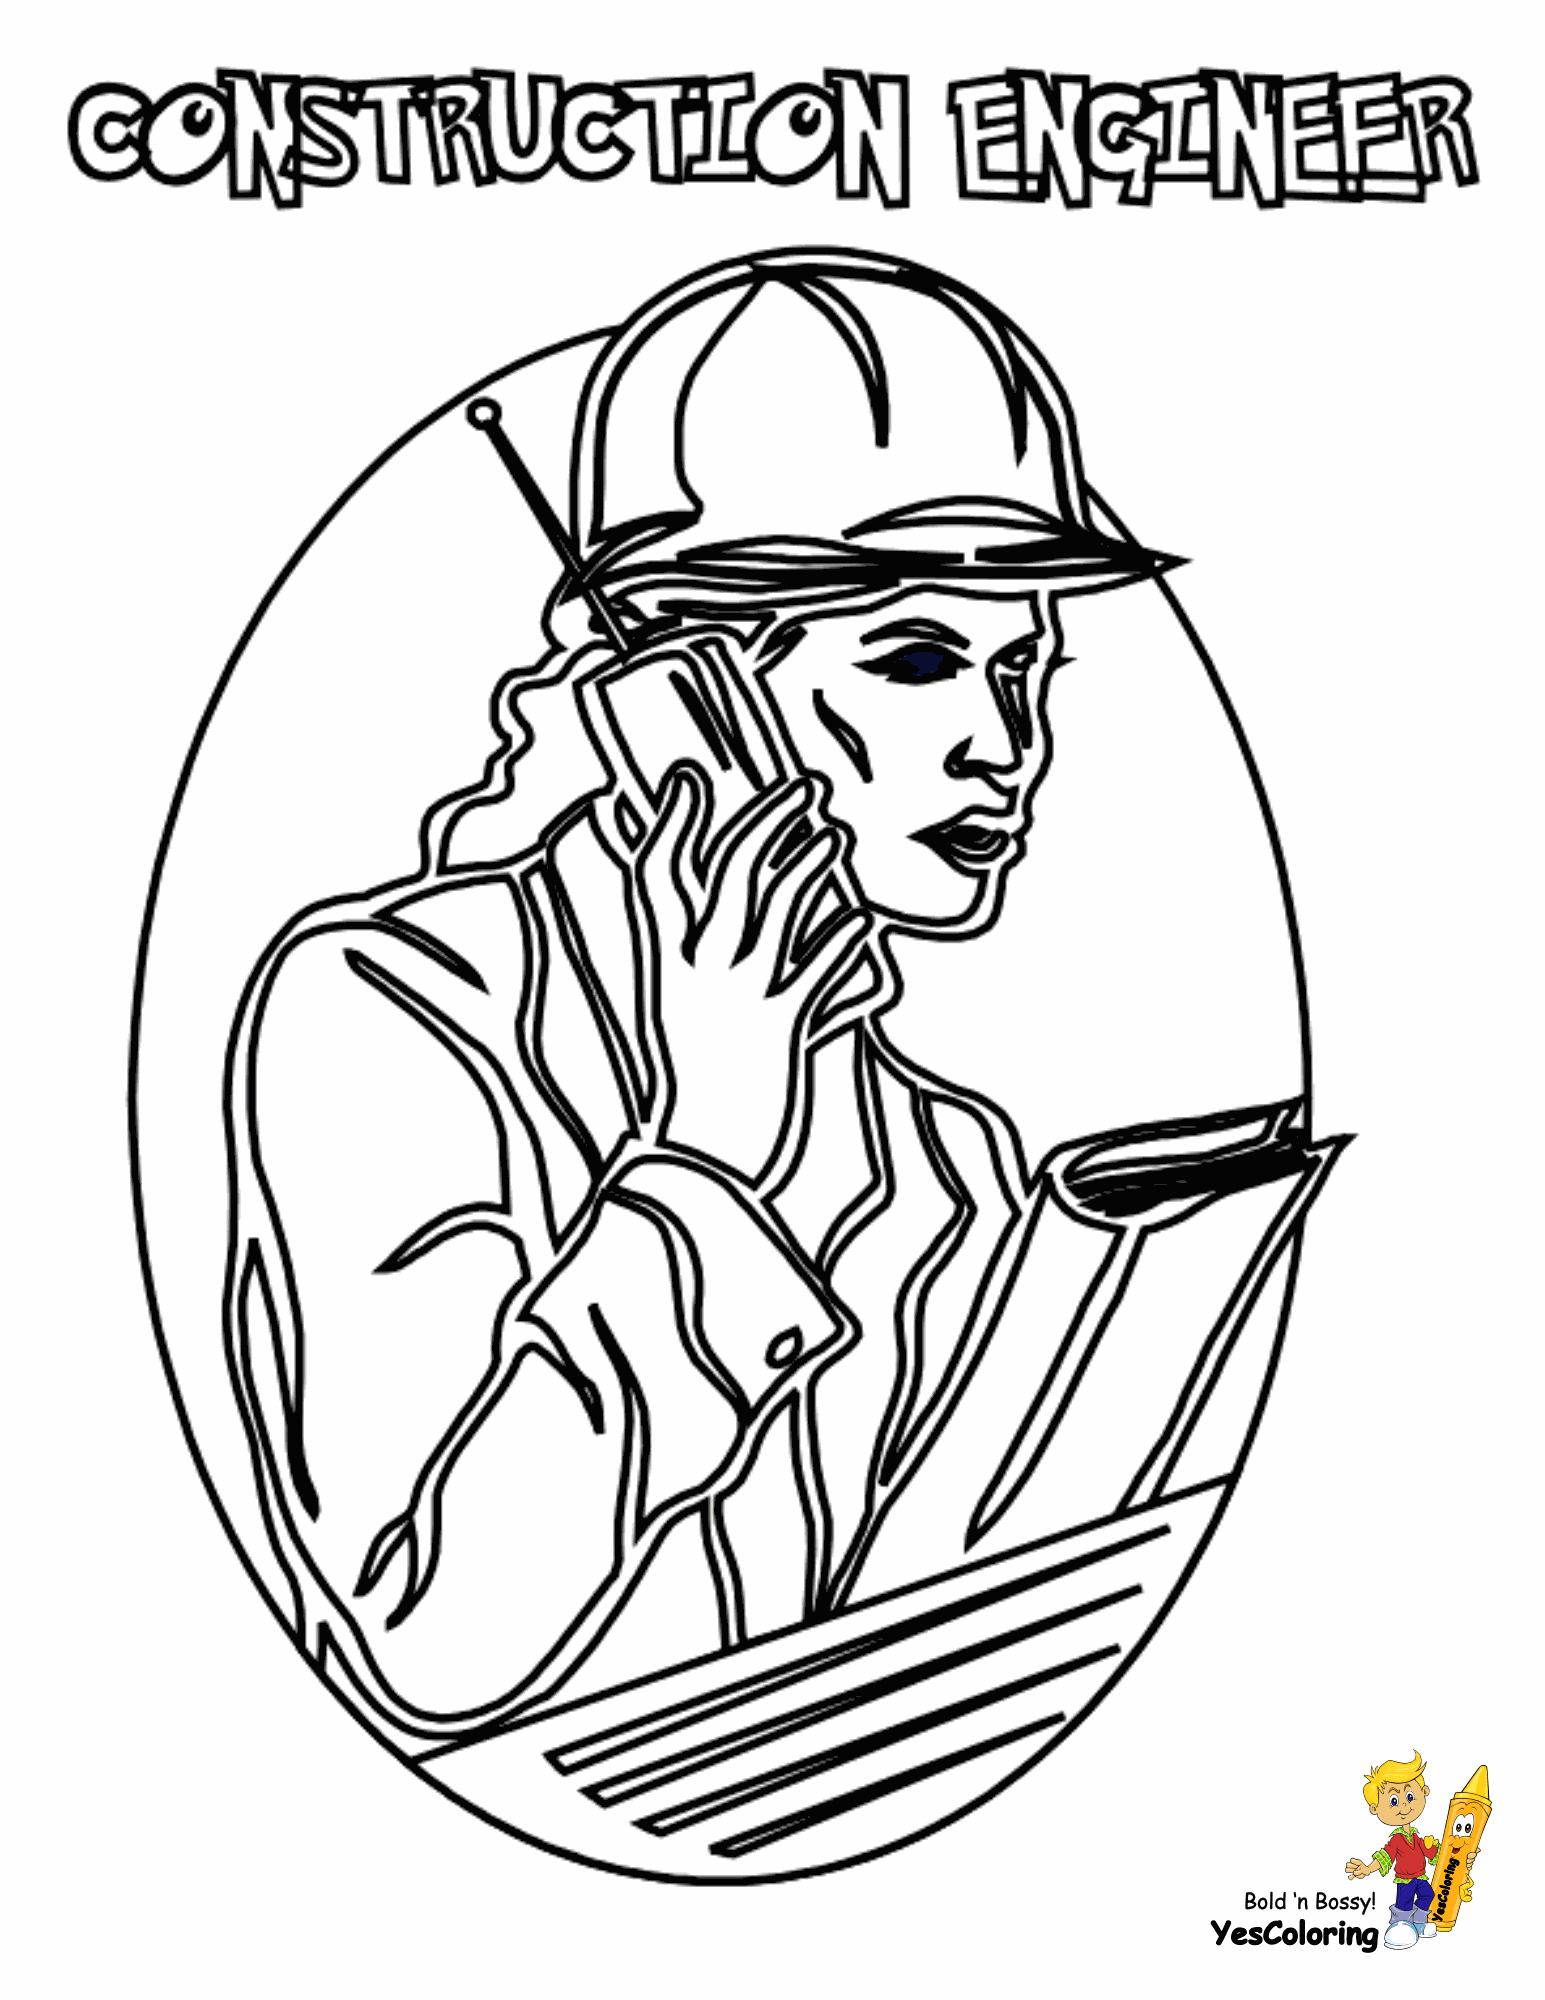 Gritty Construction Coloring Pictures | Free | Construction